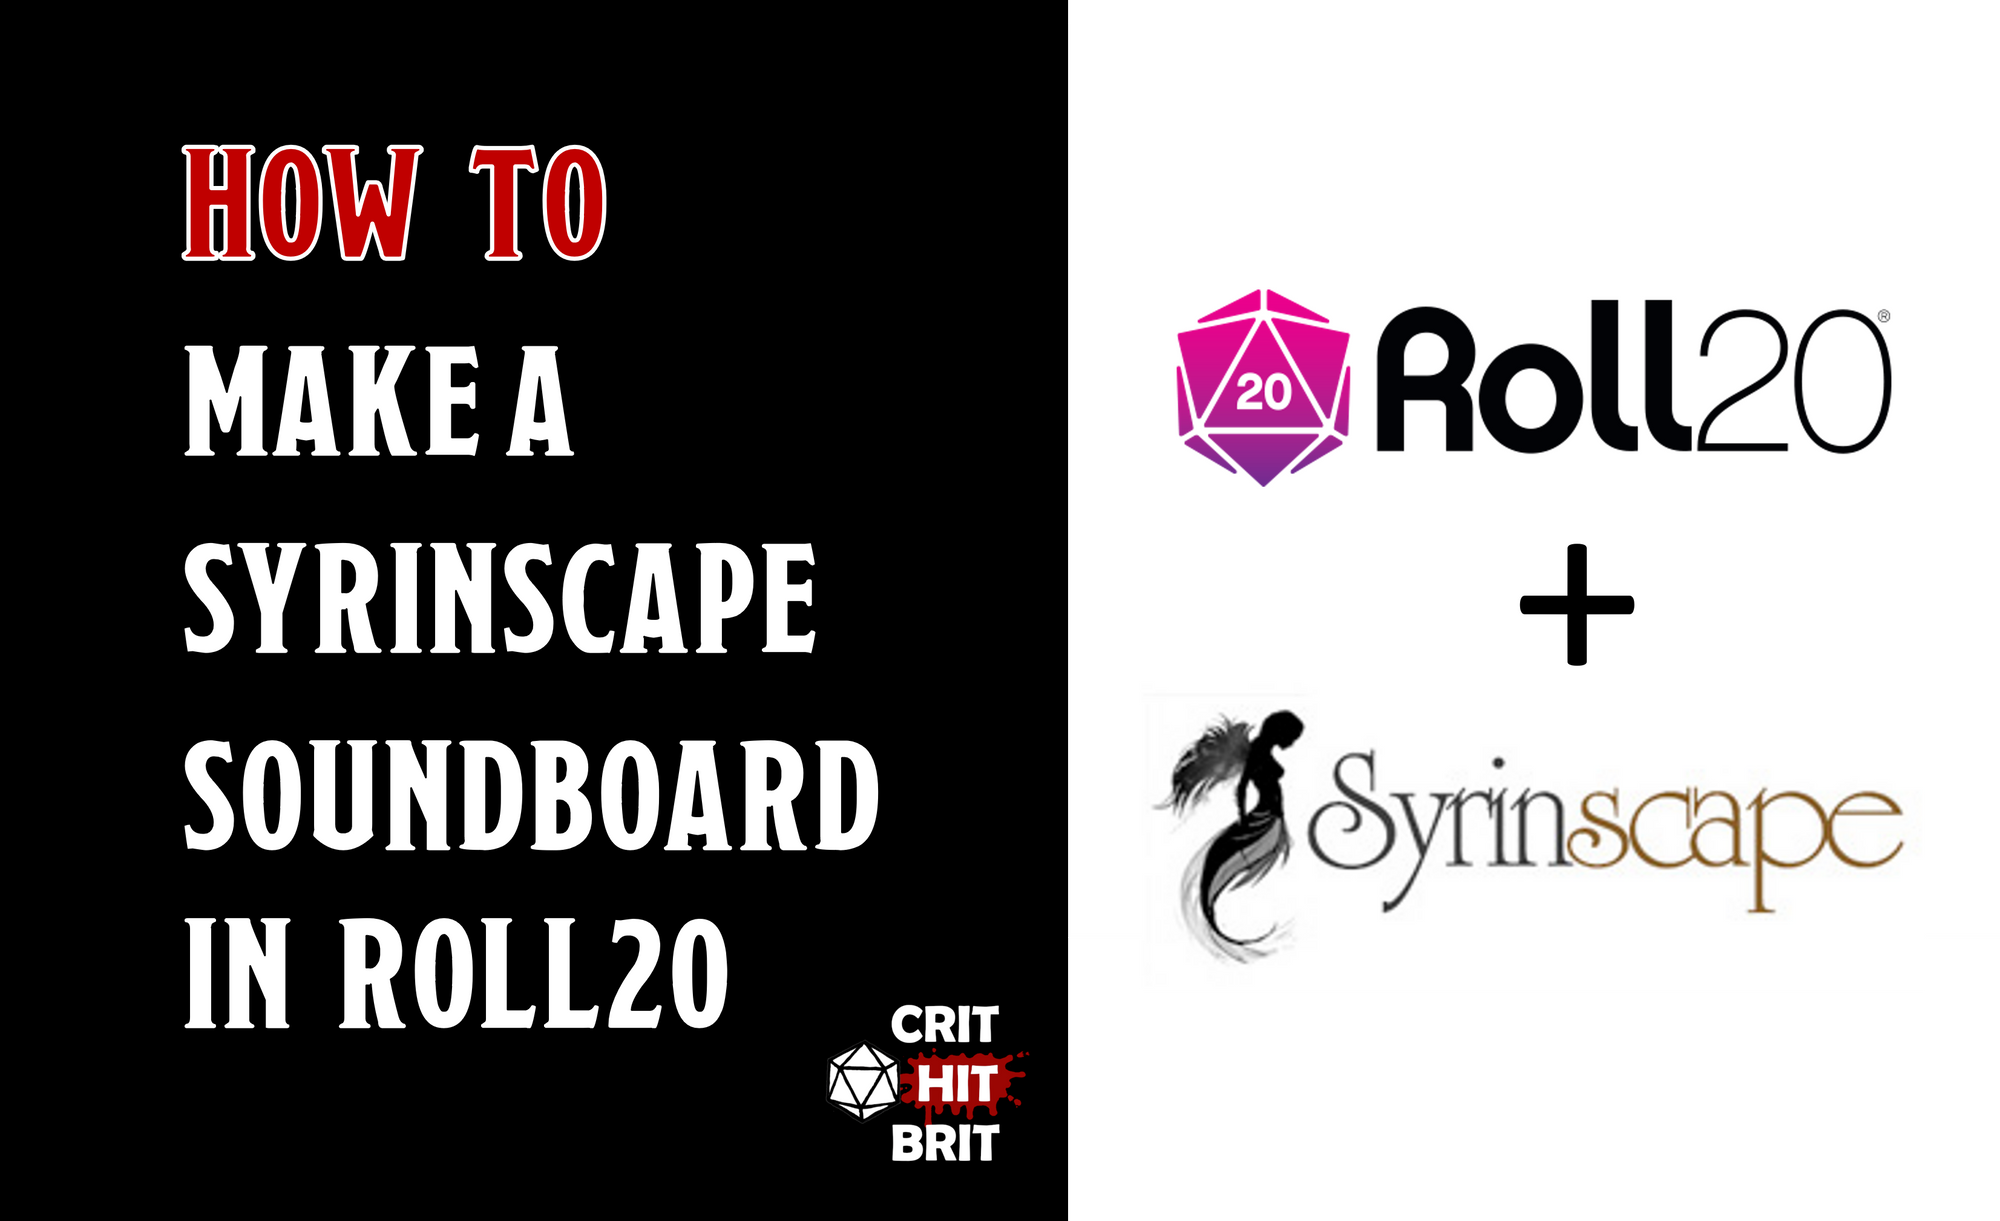 Roll20 Tutorial #1: How to make a Syrinscape soundboard on Roll20